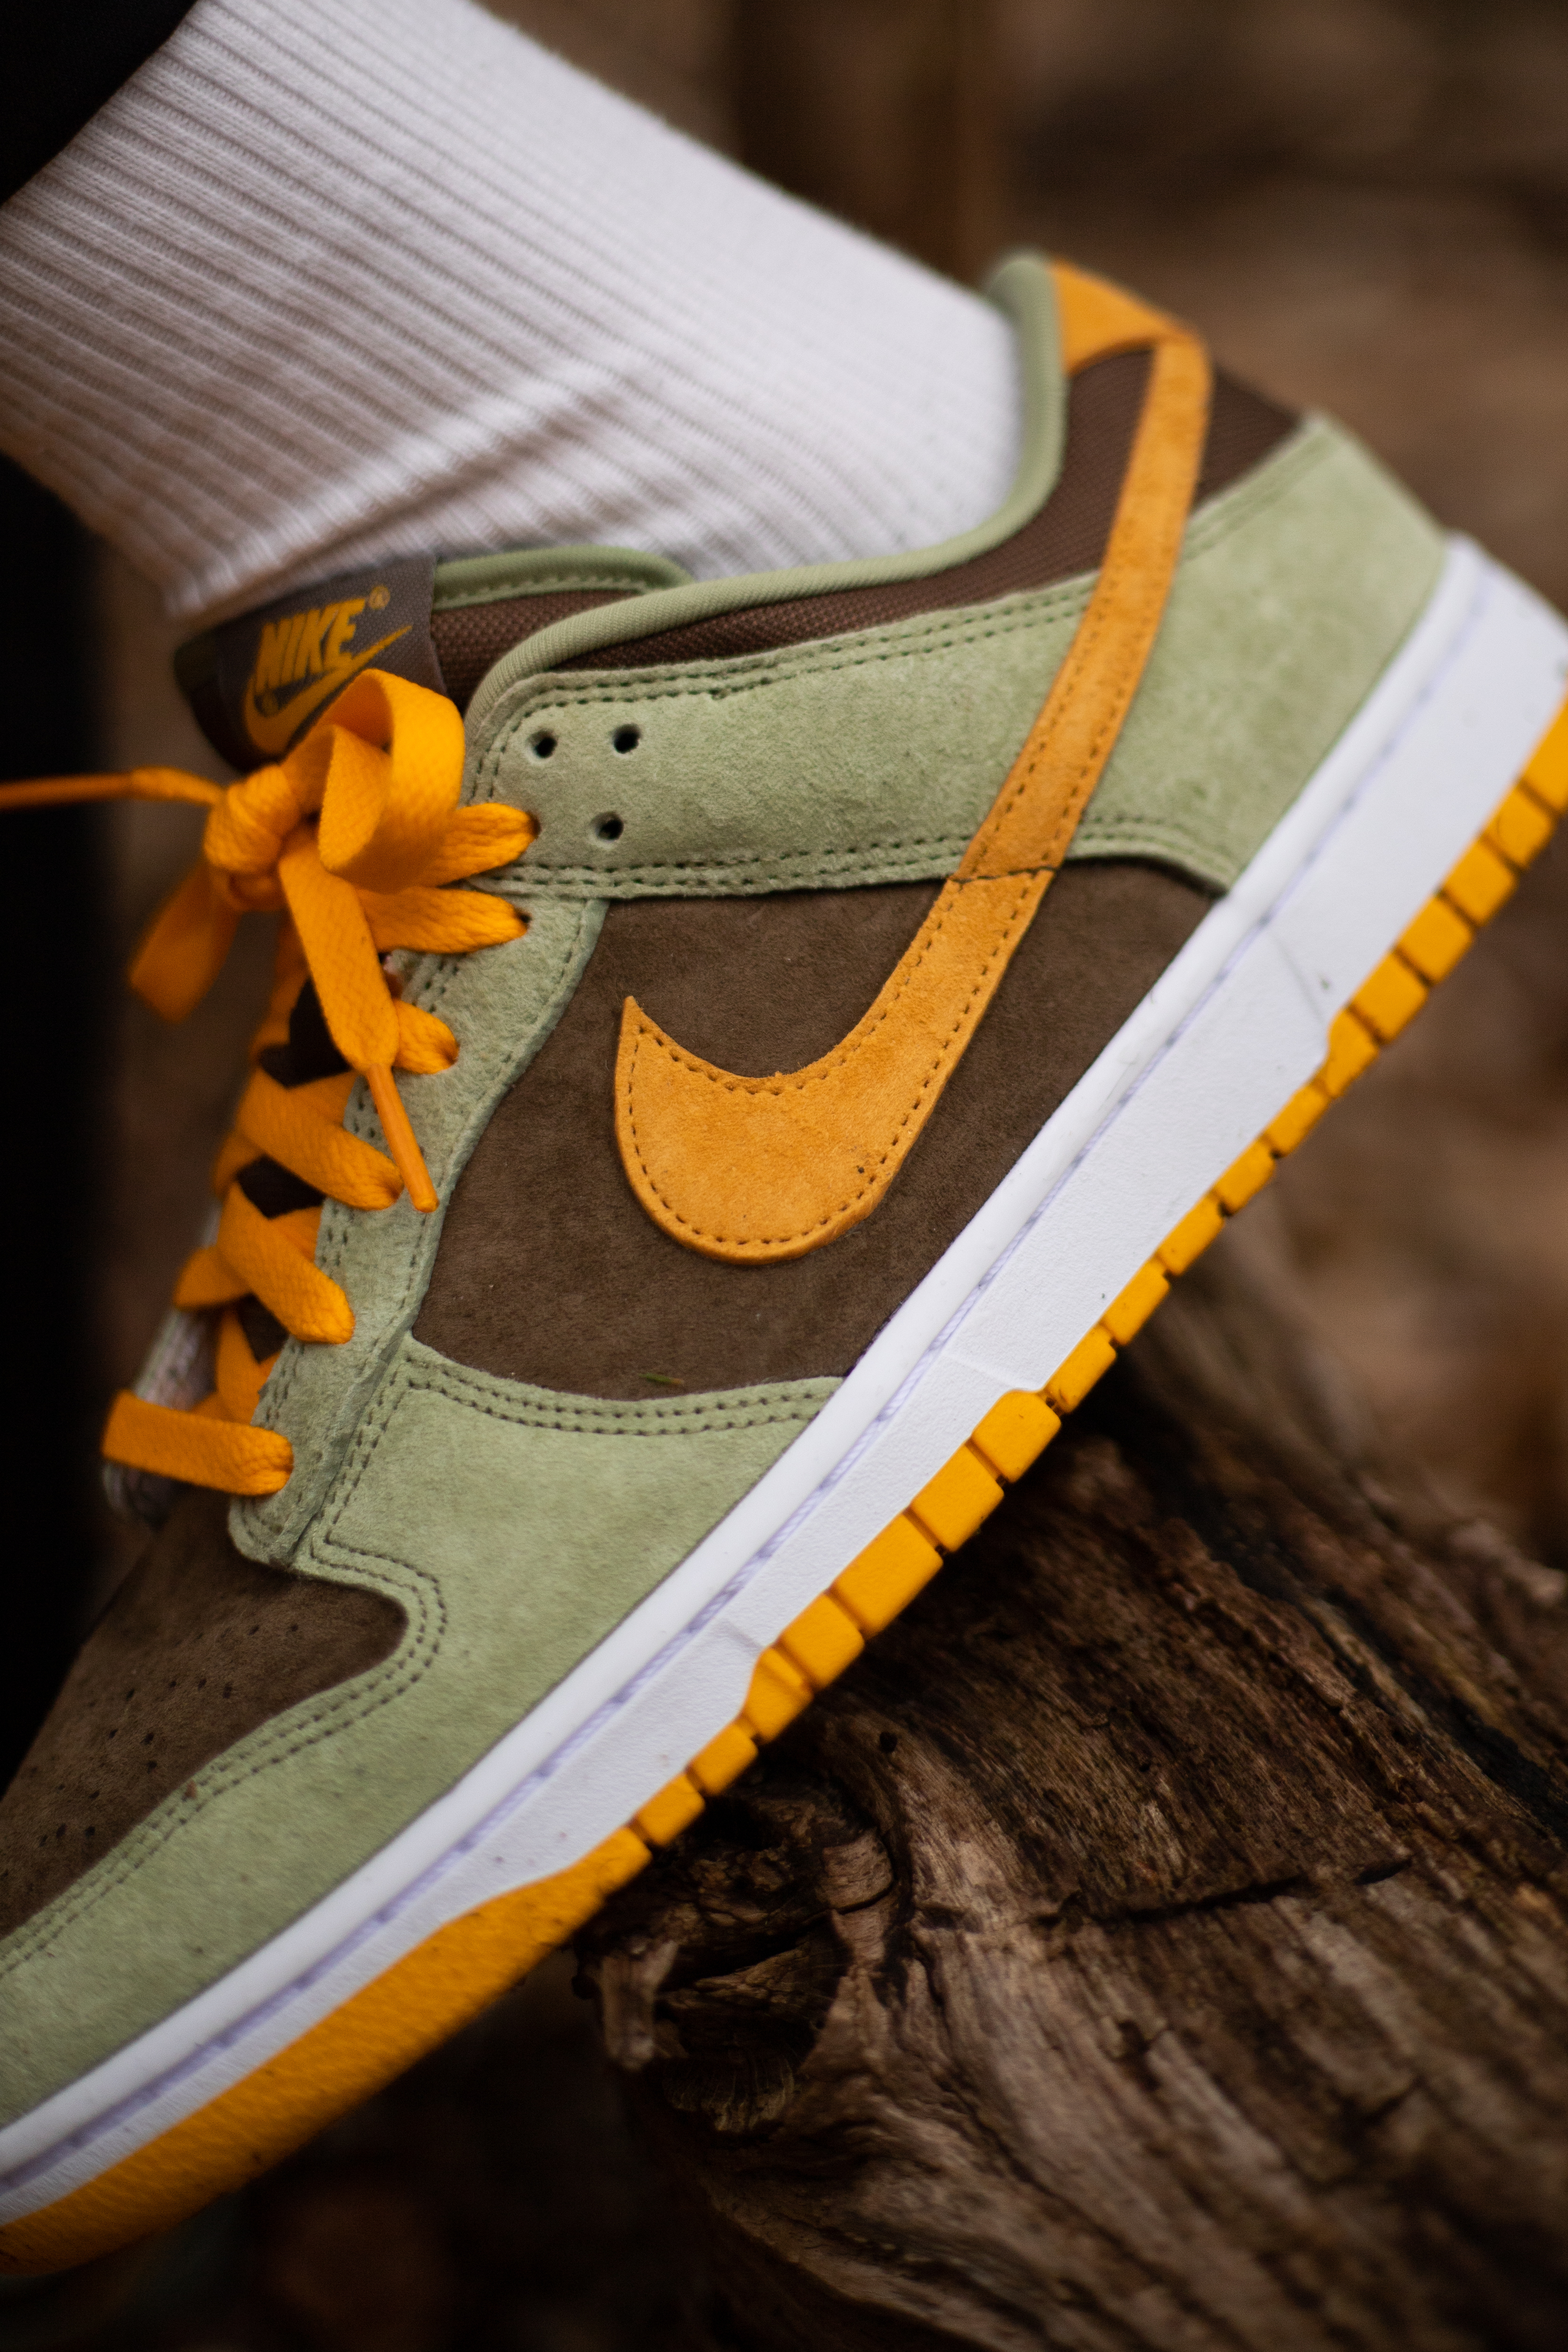 Dunk Low 'Dusty Olive'